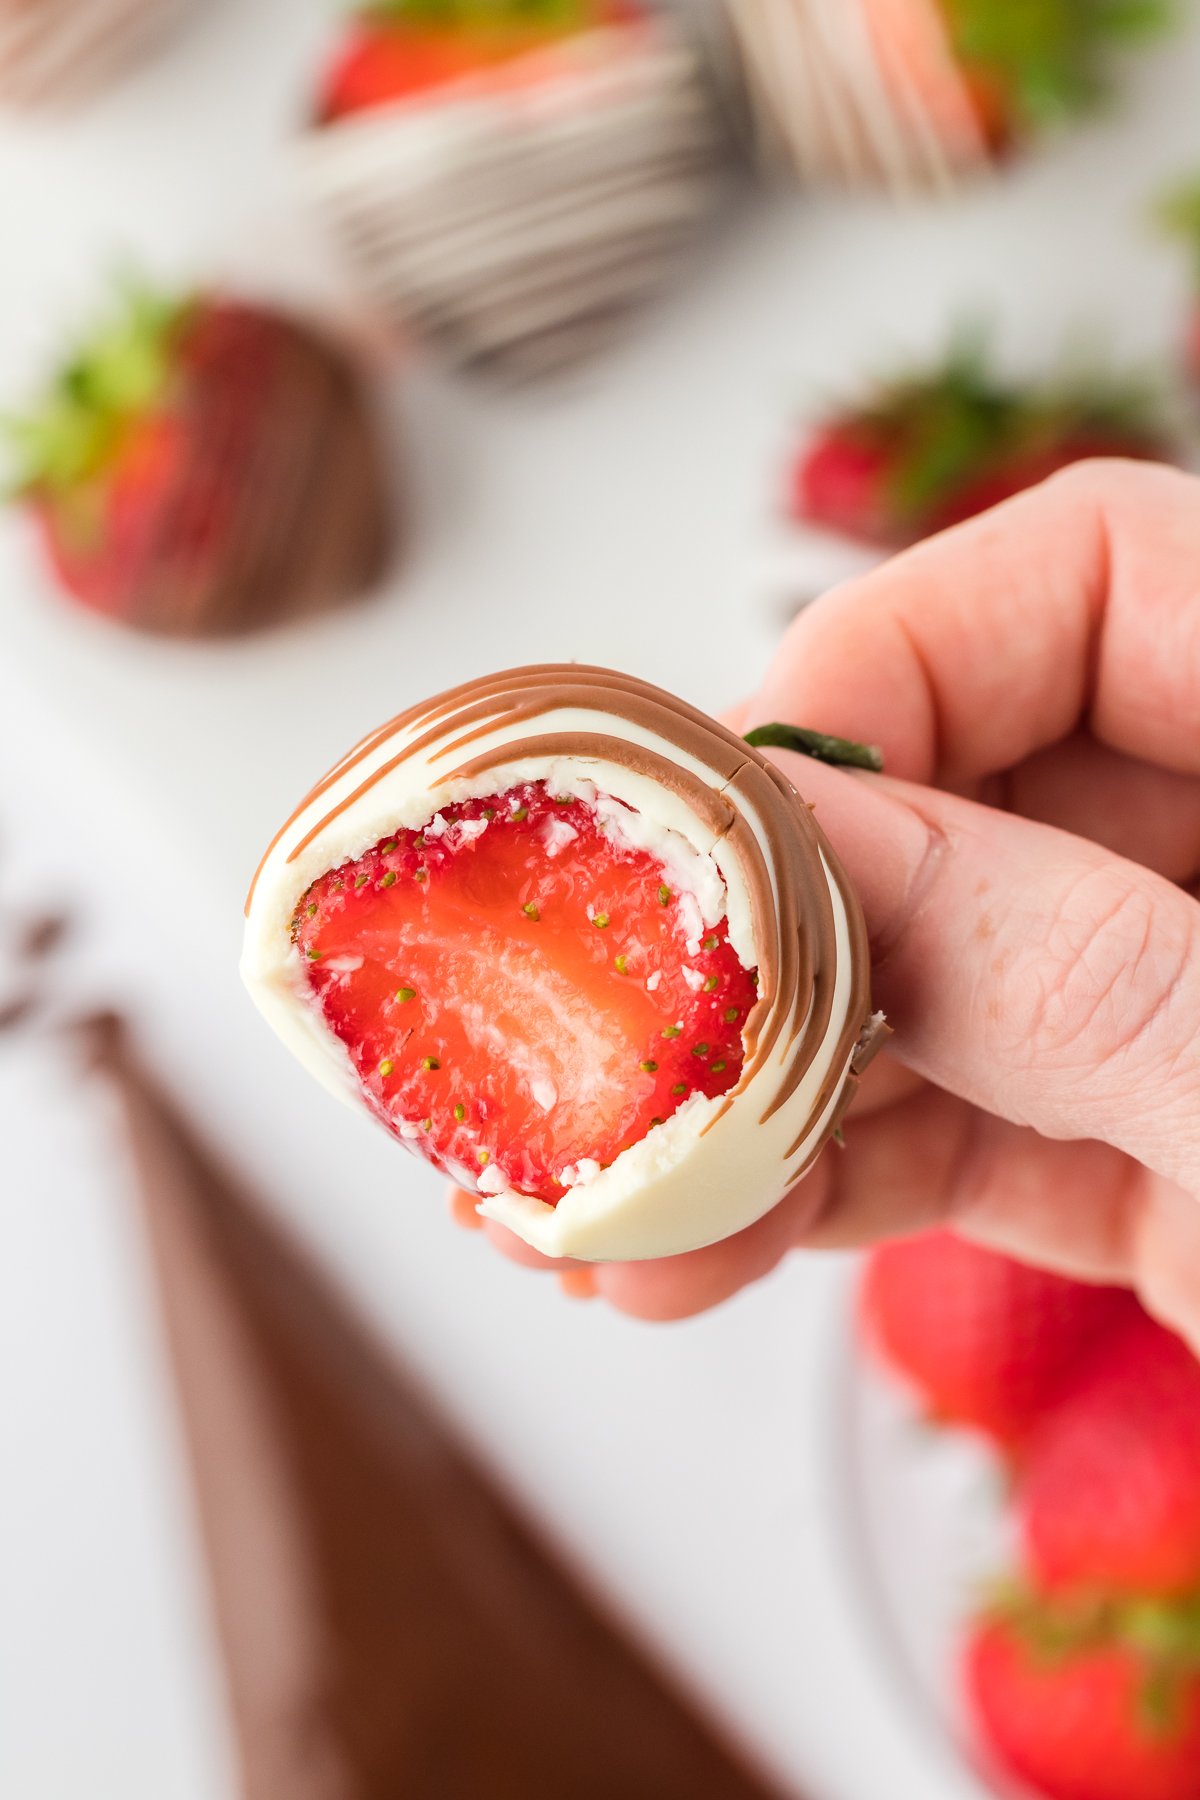 Close up of a hand holding a chocolate covered strawberry with one bite out of it, showing the fresh red strawberry inside